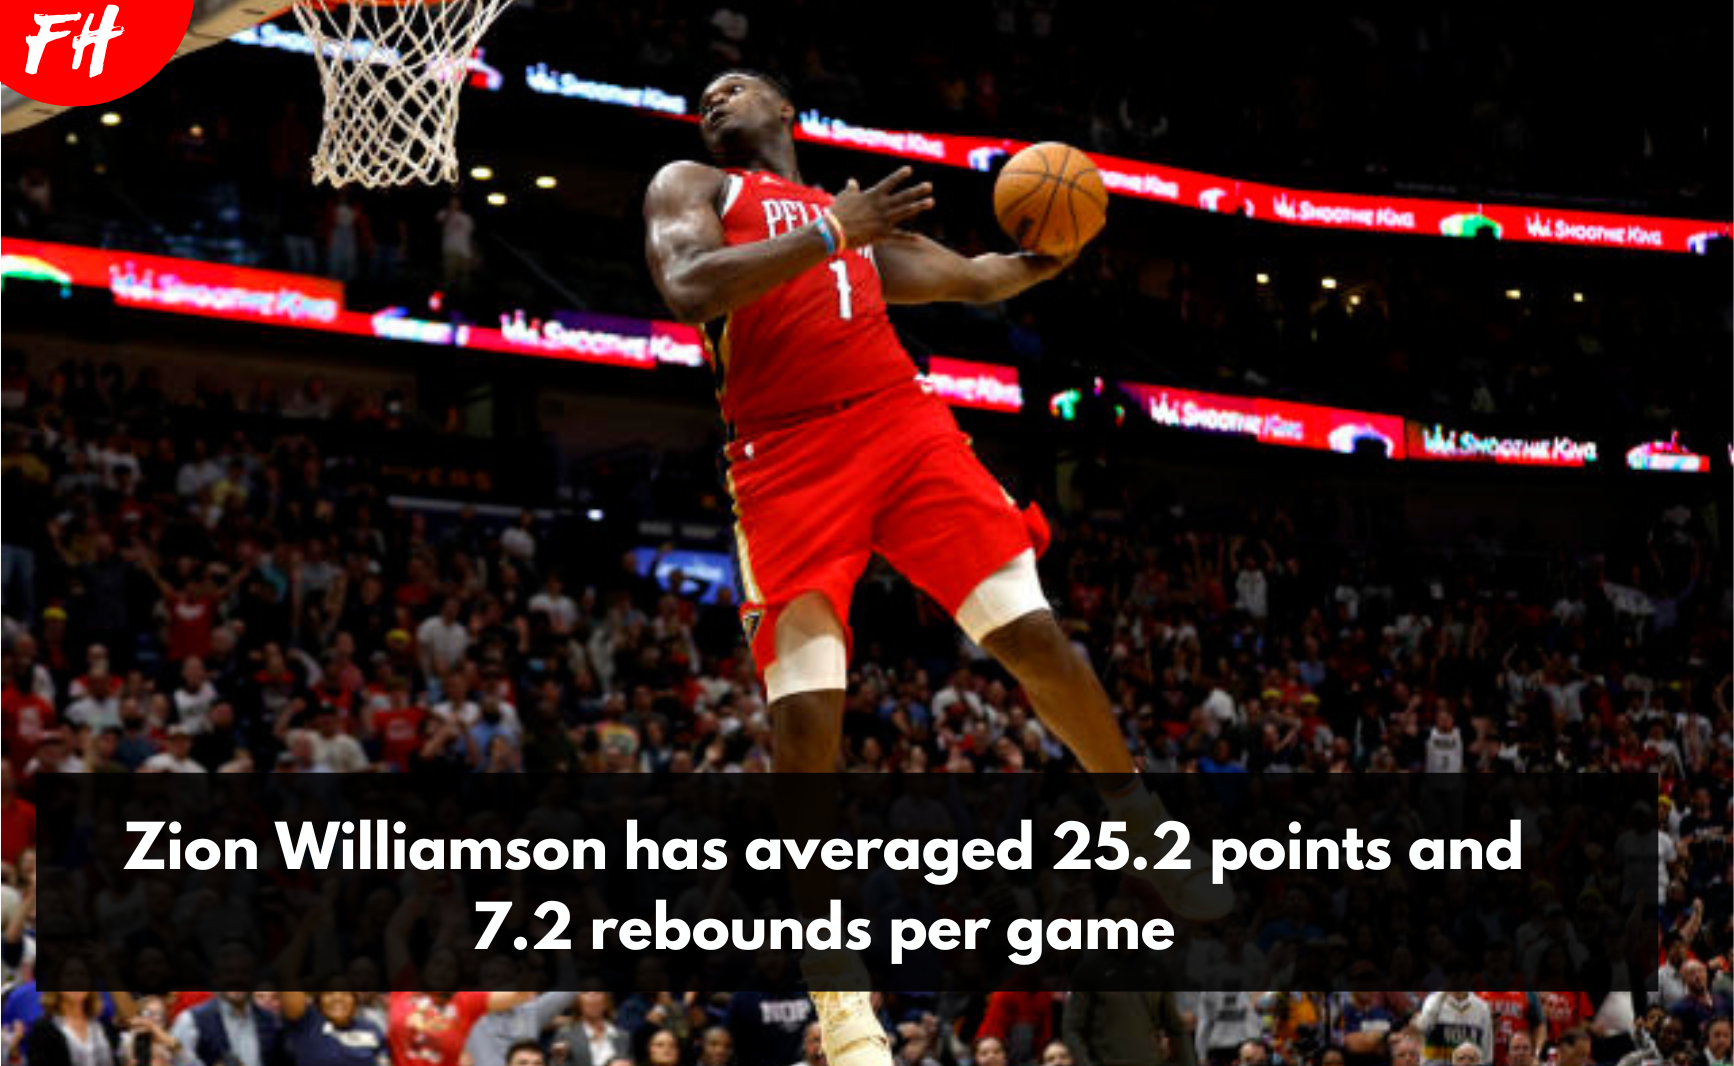 Zion Williamson has averaged 25.2 points and 7.2 rebounds per game